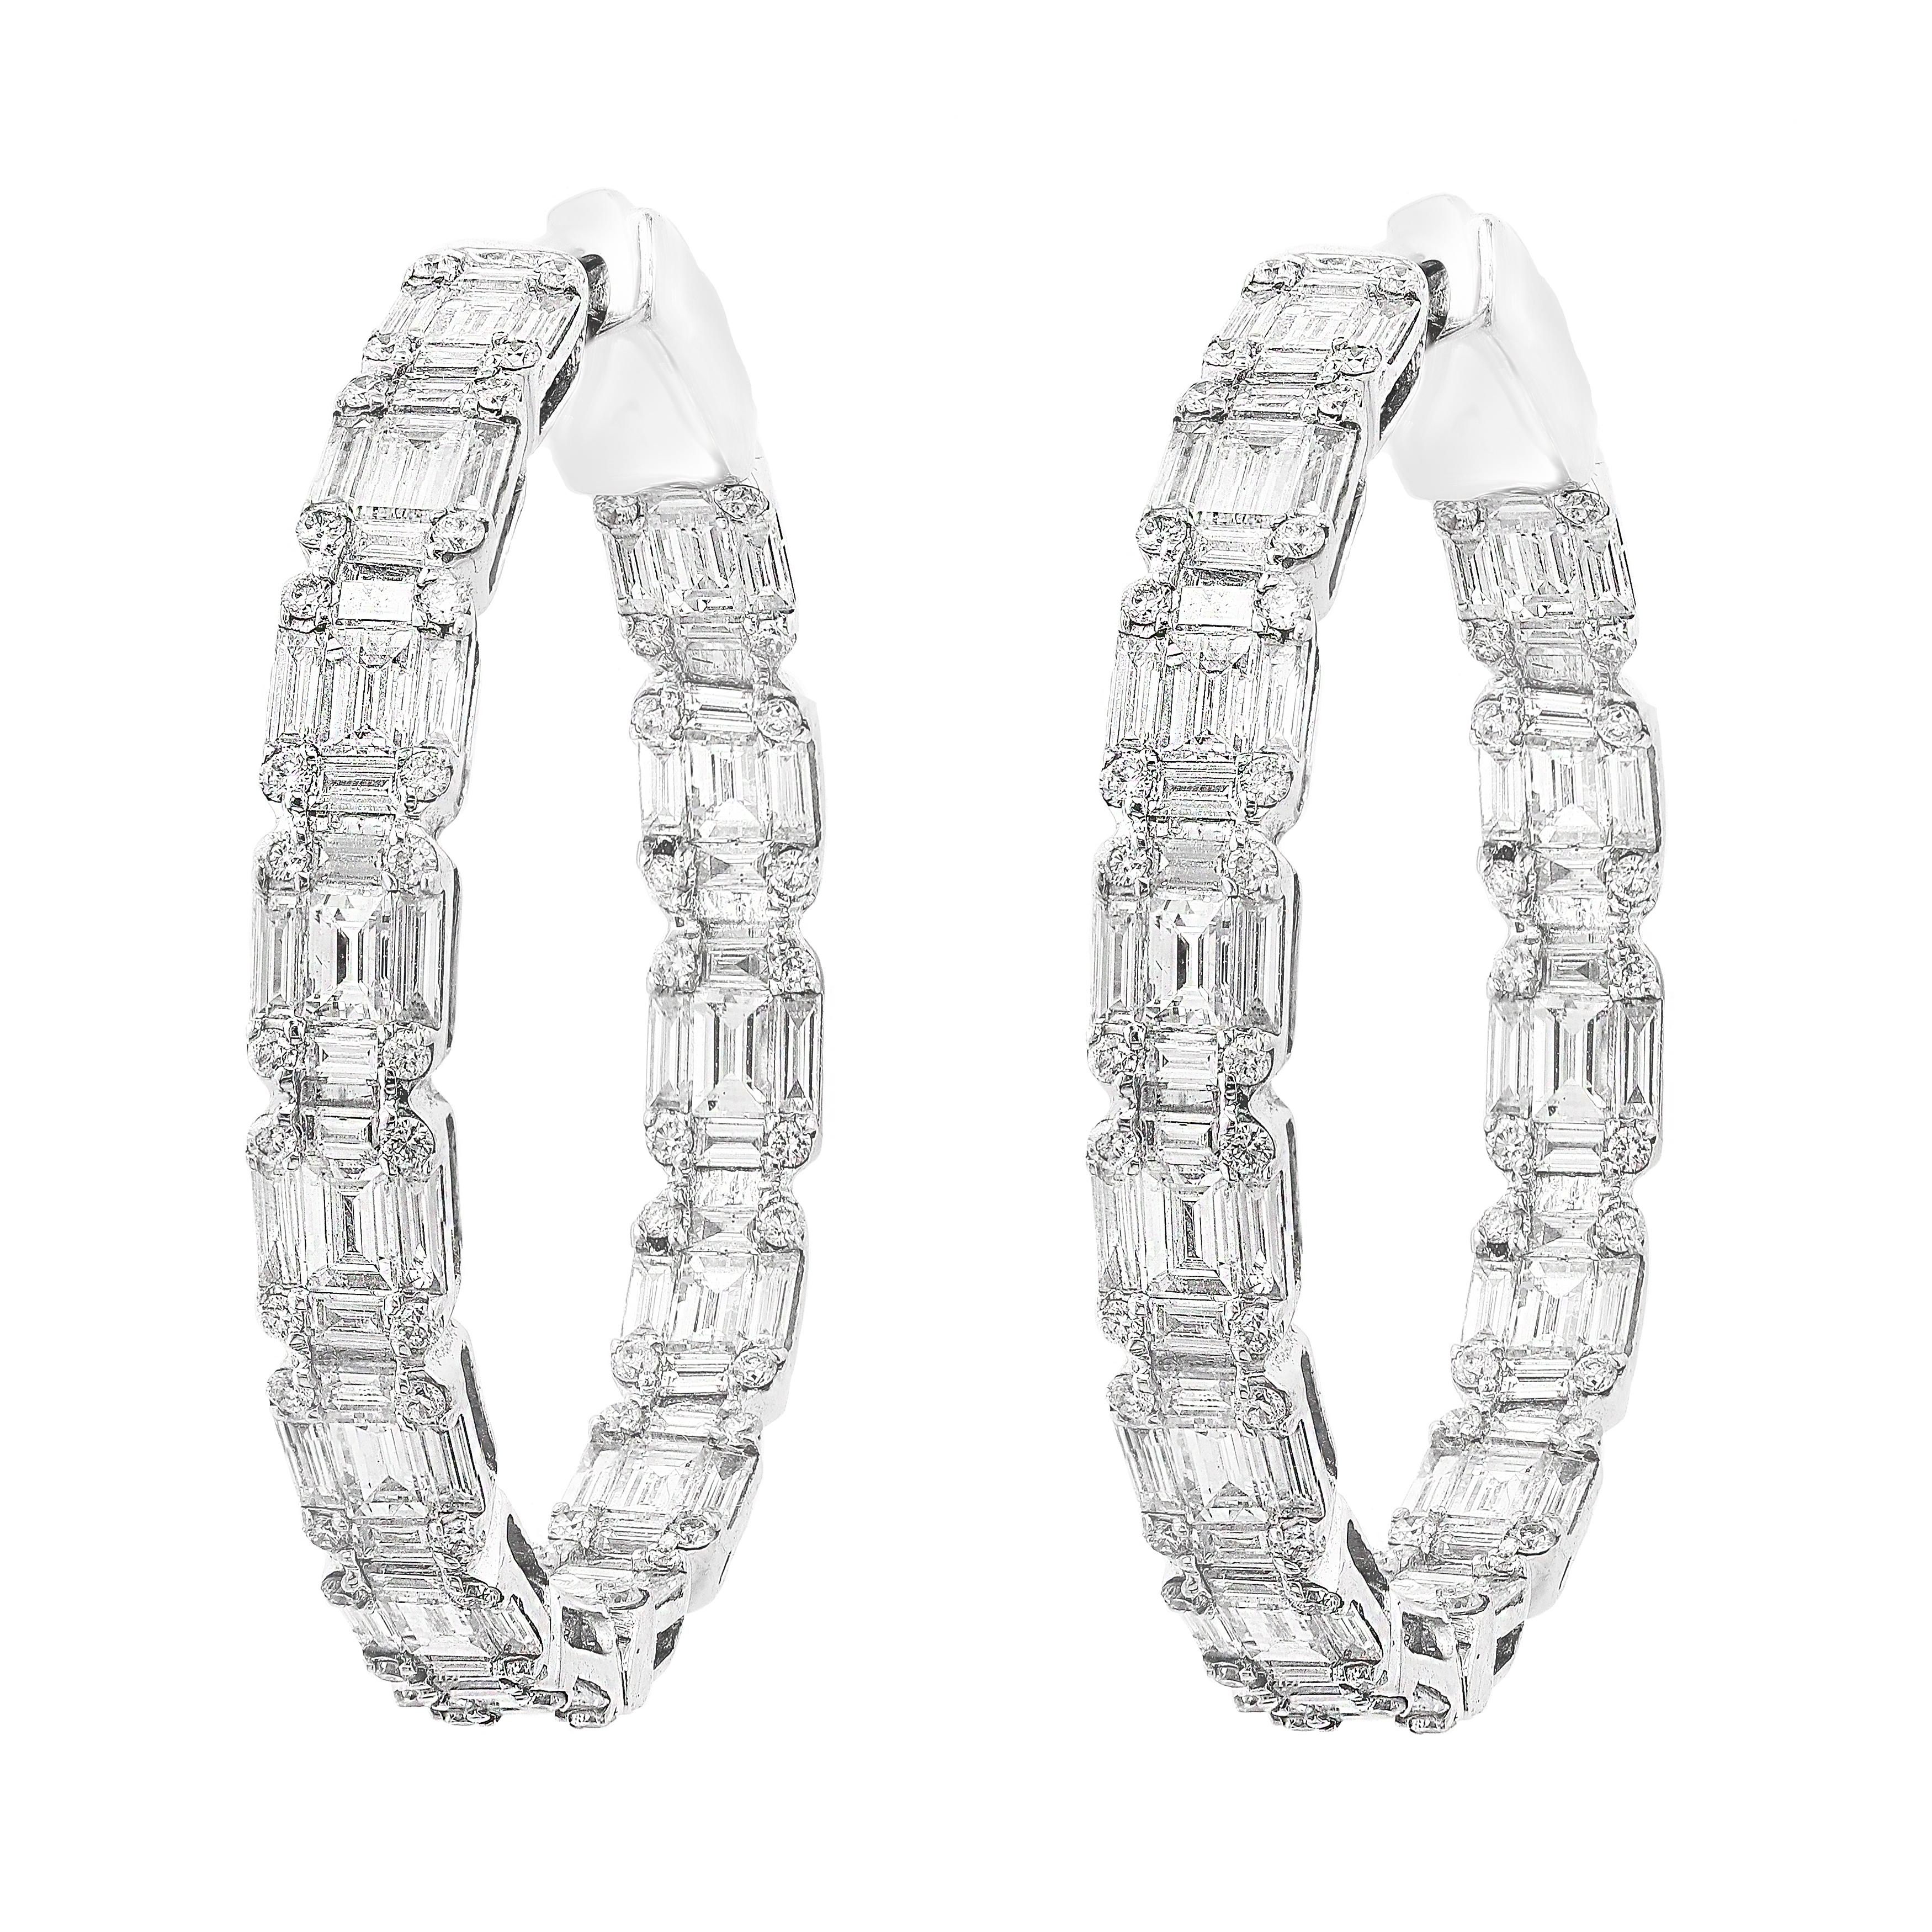 Gorgeous and classic diamond hoop earrings. Features dazzling baguette and round diamonds set in shared prongs to maximize the brilliance of the diamonds. Total weight of the Baguette Diamonds is 6.46 carat and Round Diamonds is 1.09 Carat. Made in